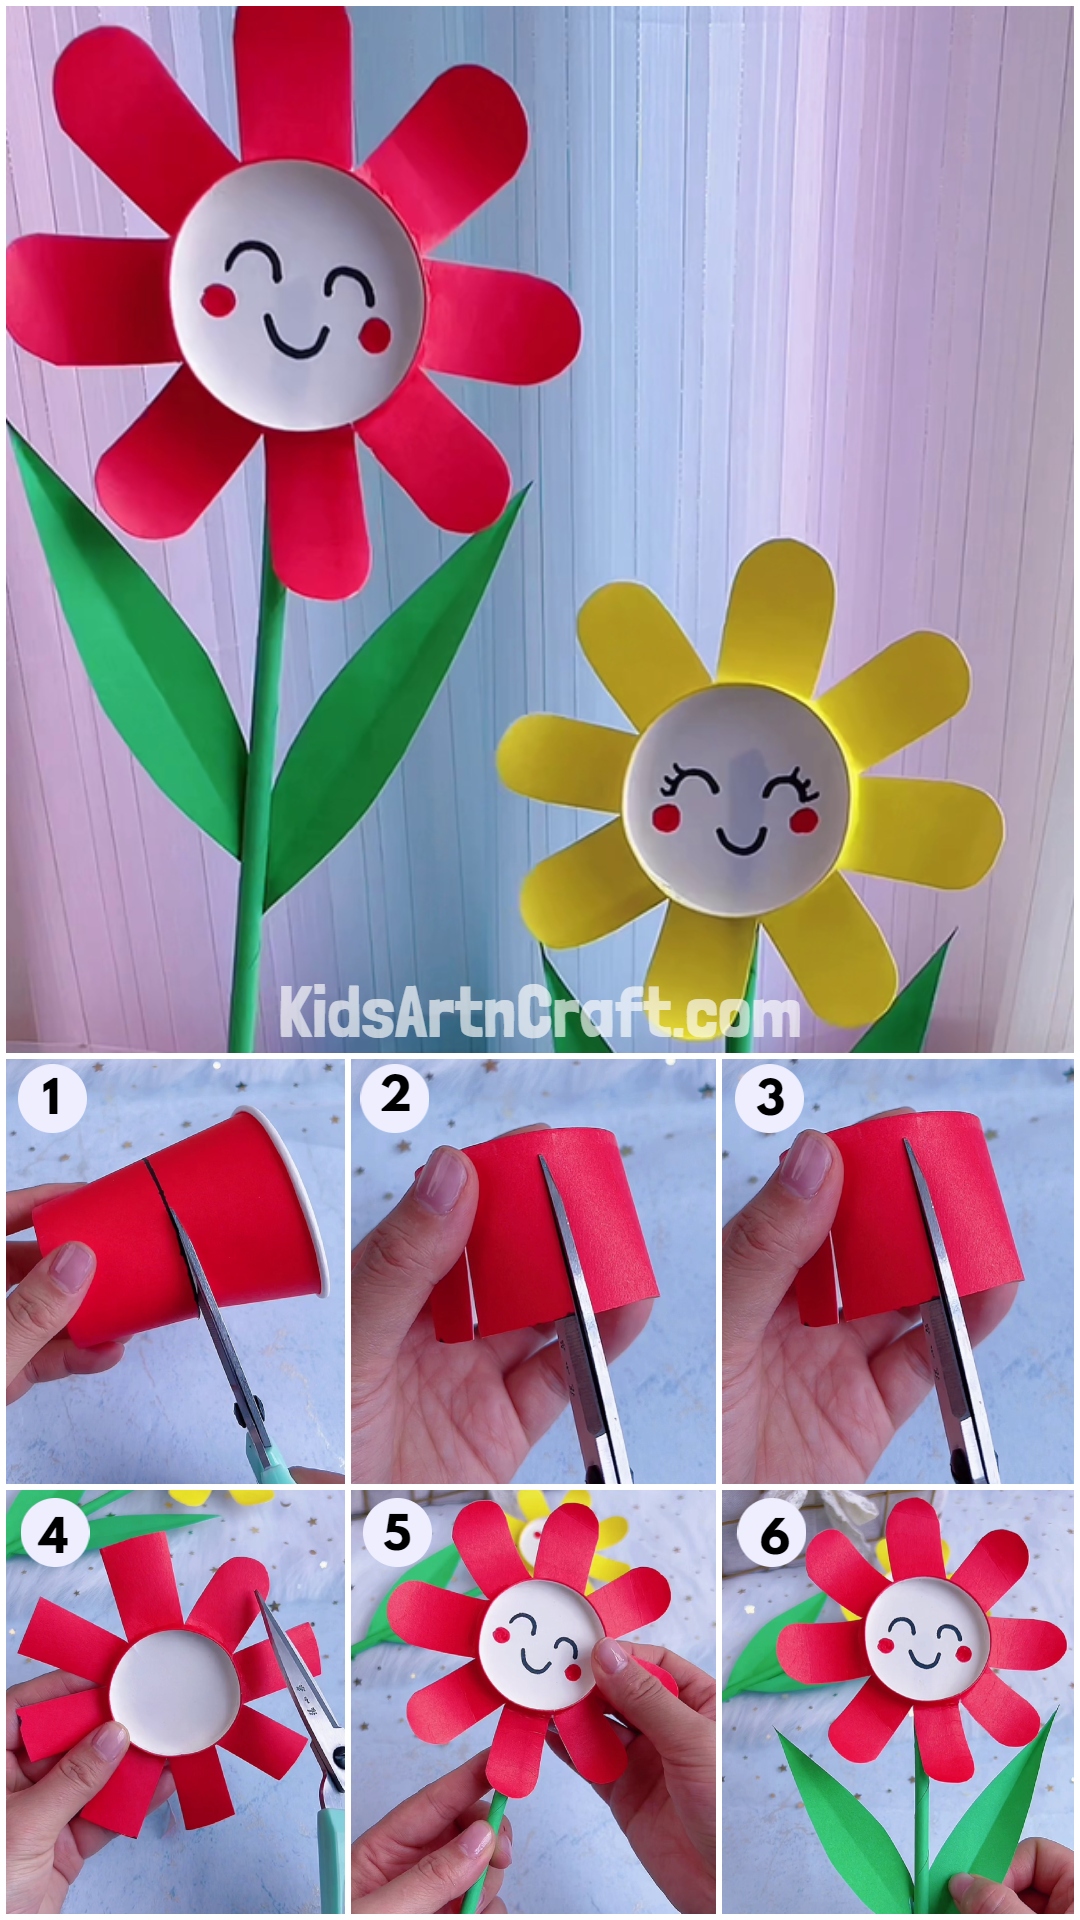 A straightforward way to craft paper cup flowers with preschoolers - Simple To Make Paper Cup Flower Craft For Preschoolers